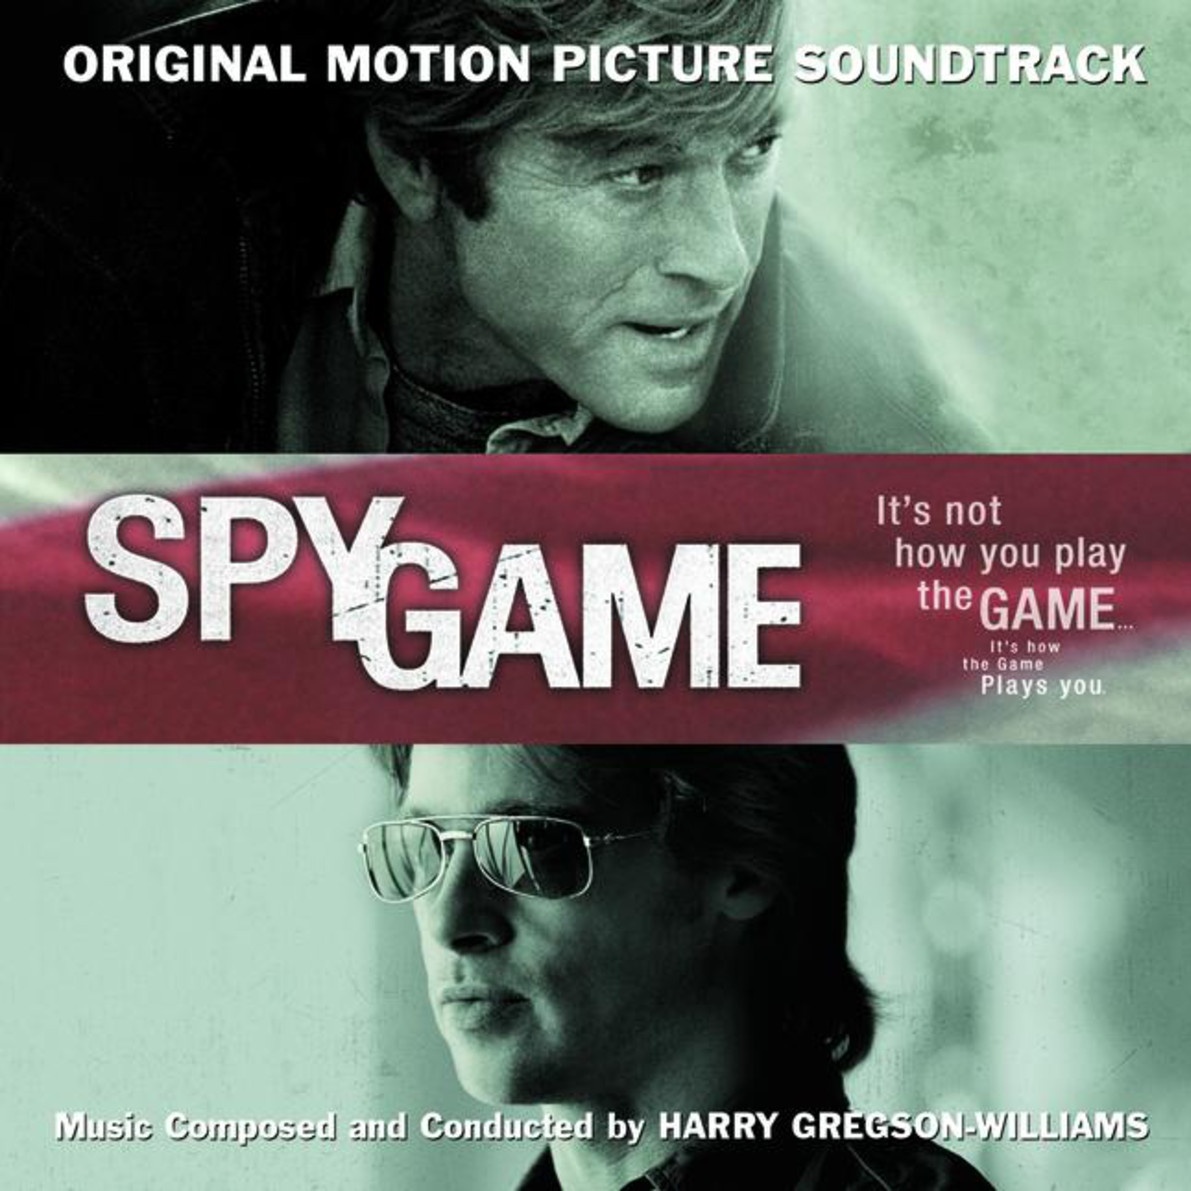 "My Name Is Tom" - Original Motion Picture Soundtrack